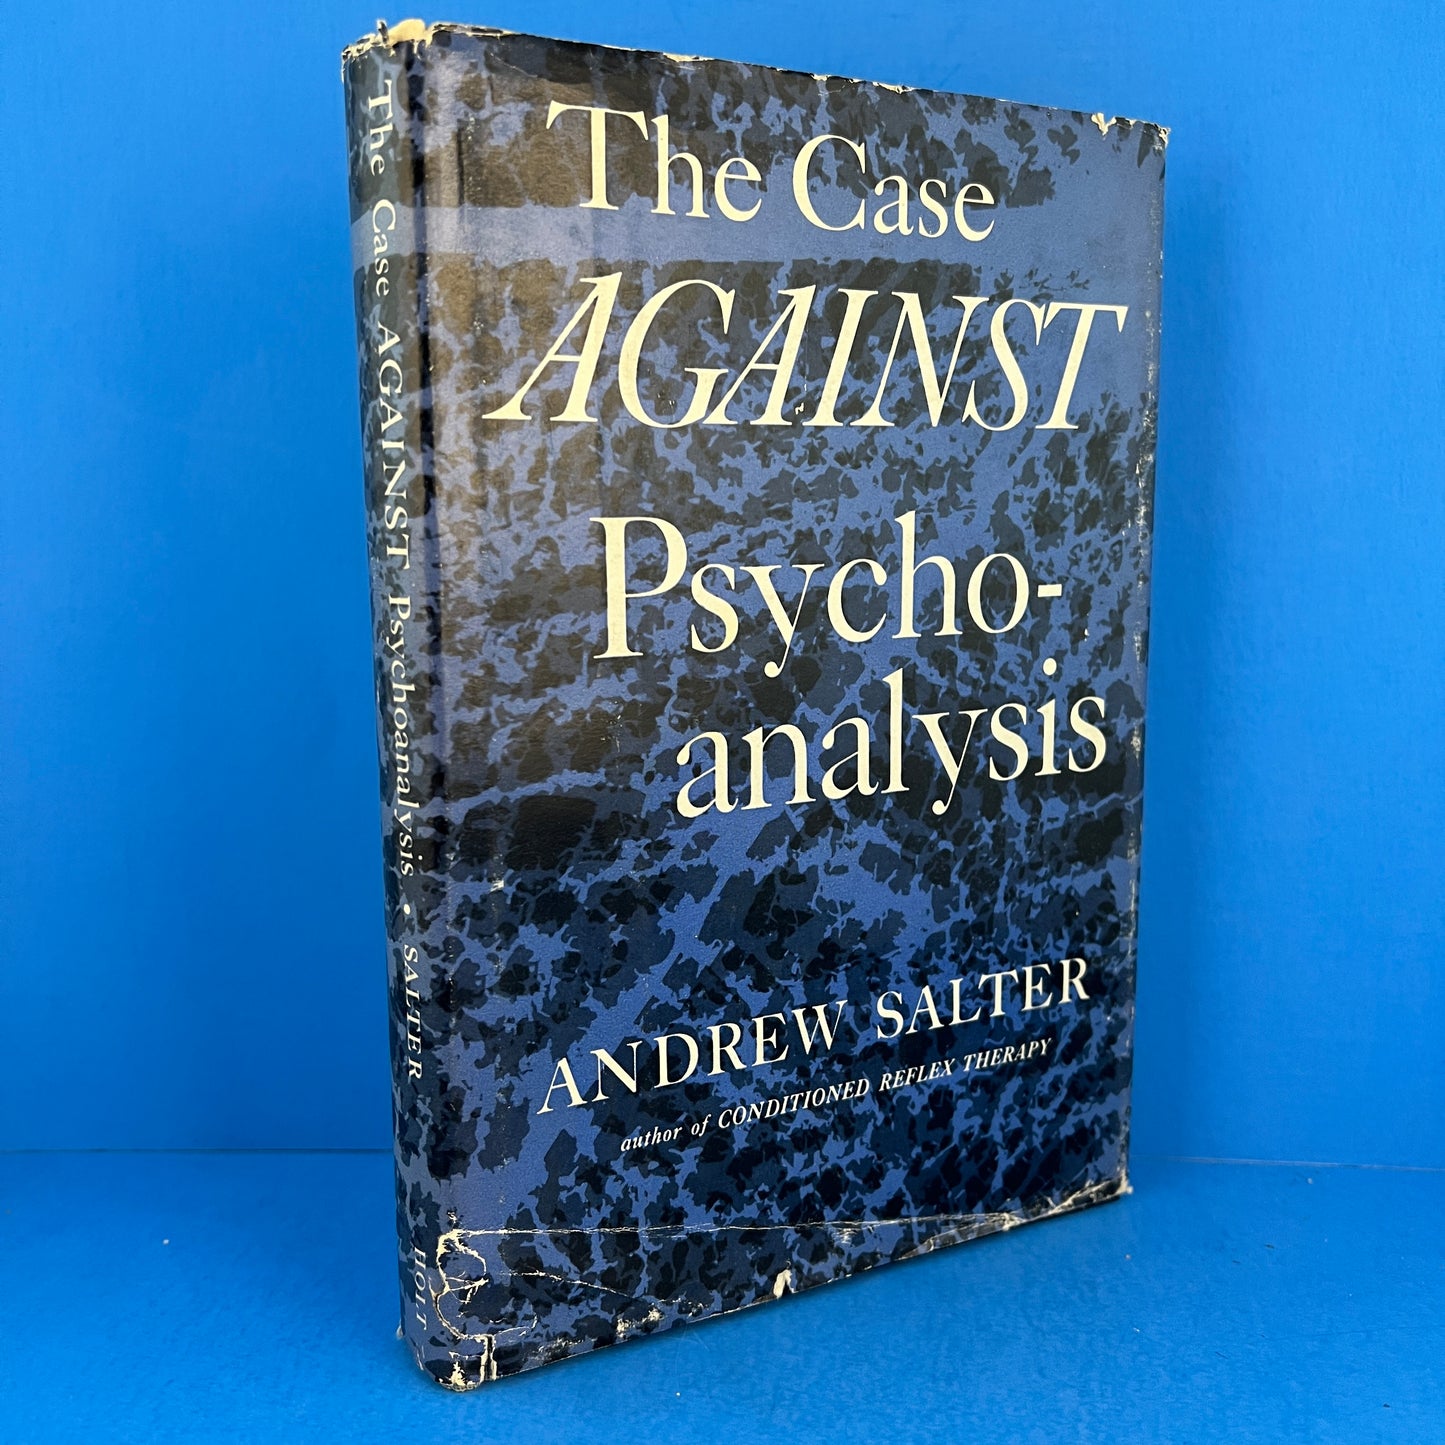 The Case Against Psychoanalysis